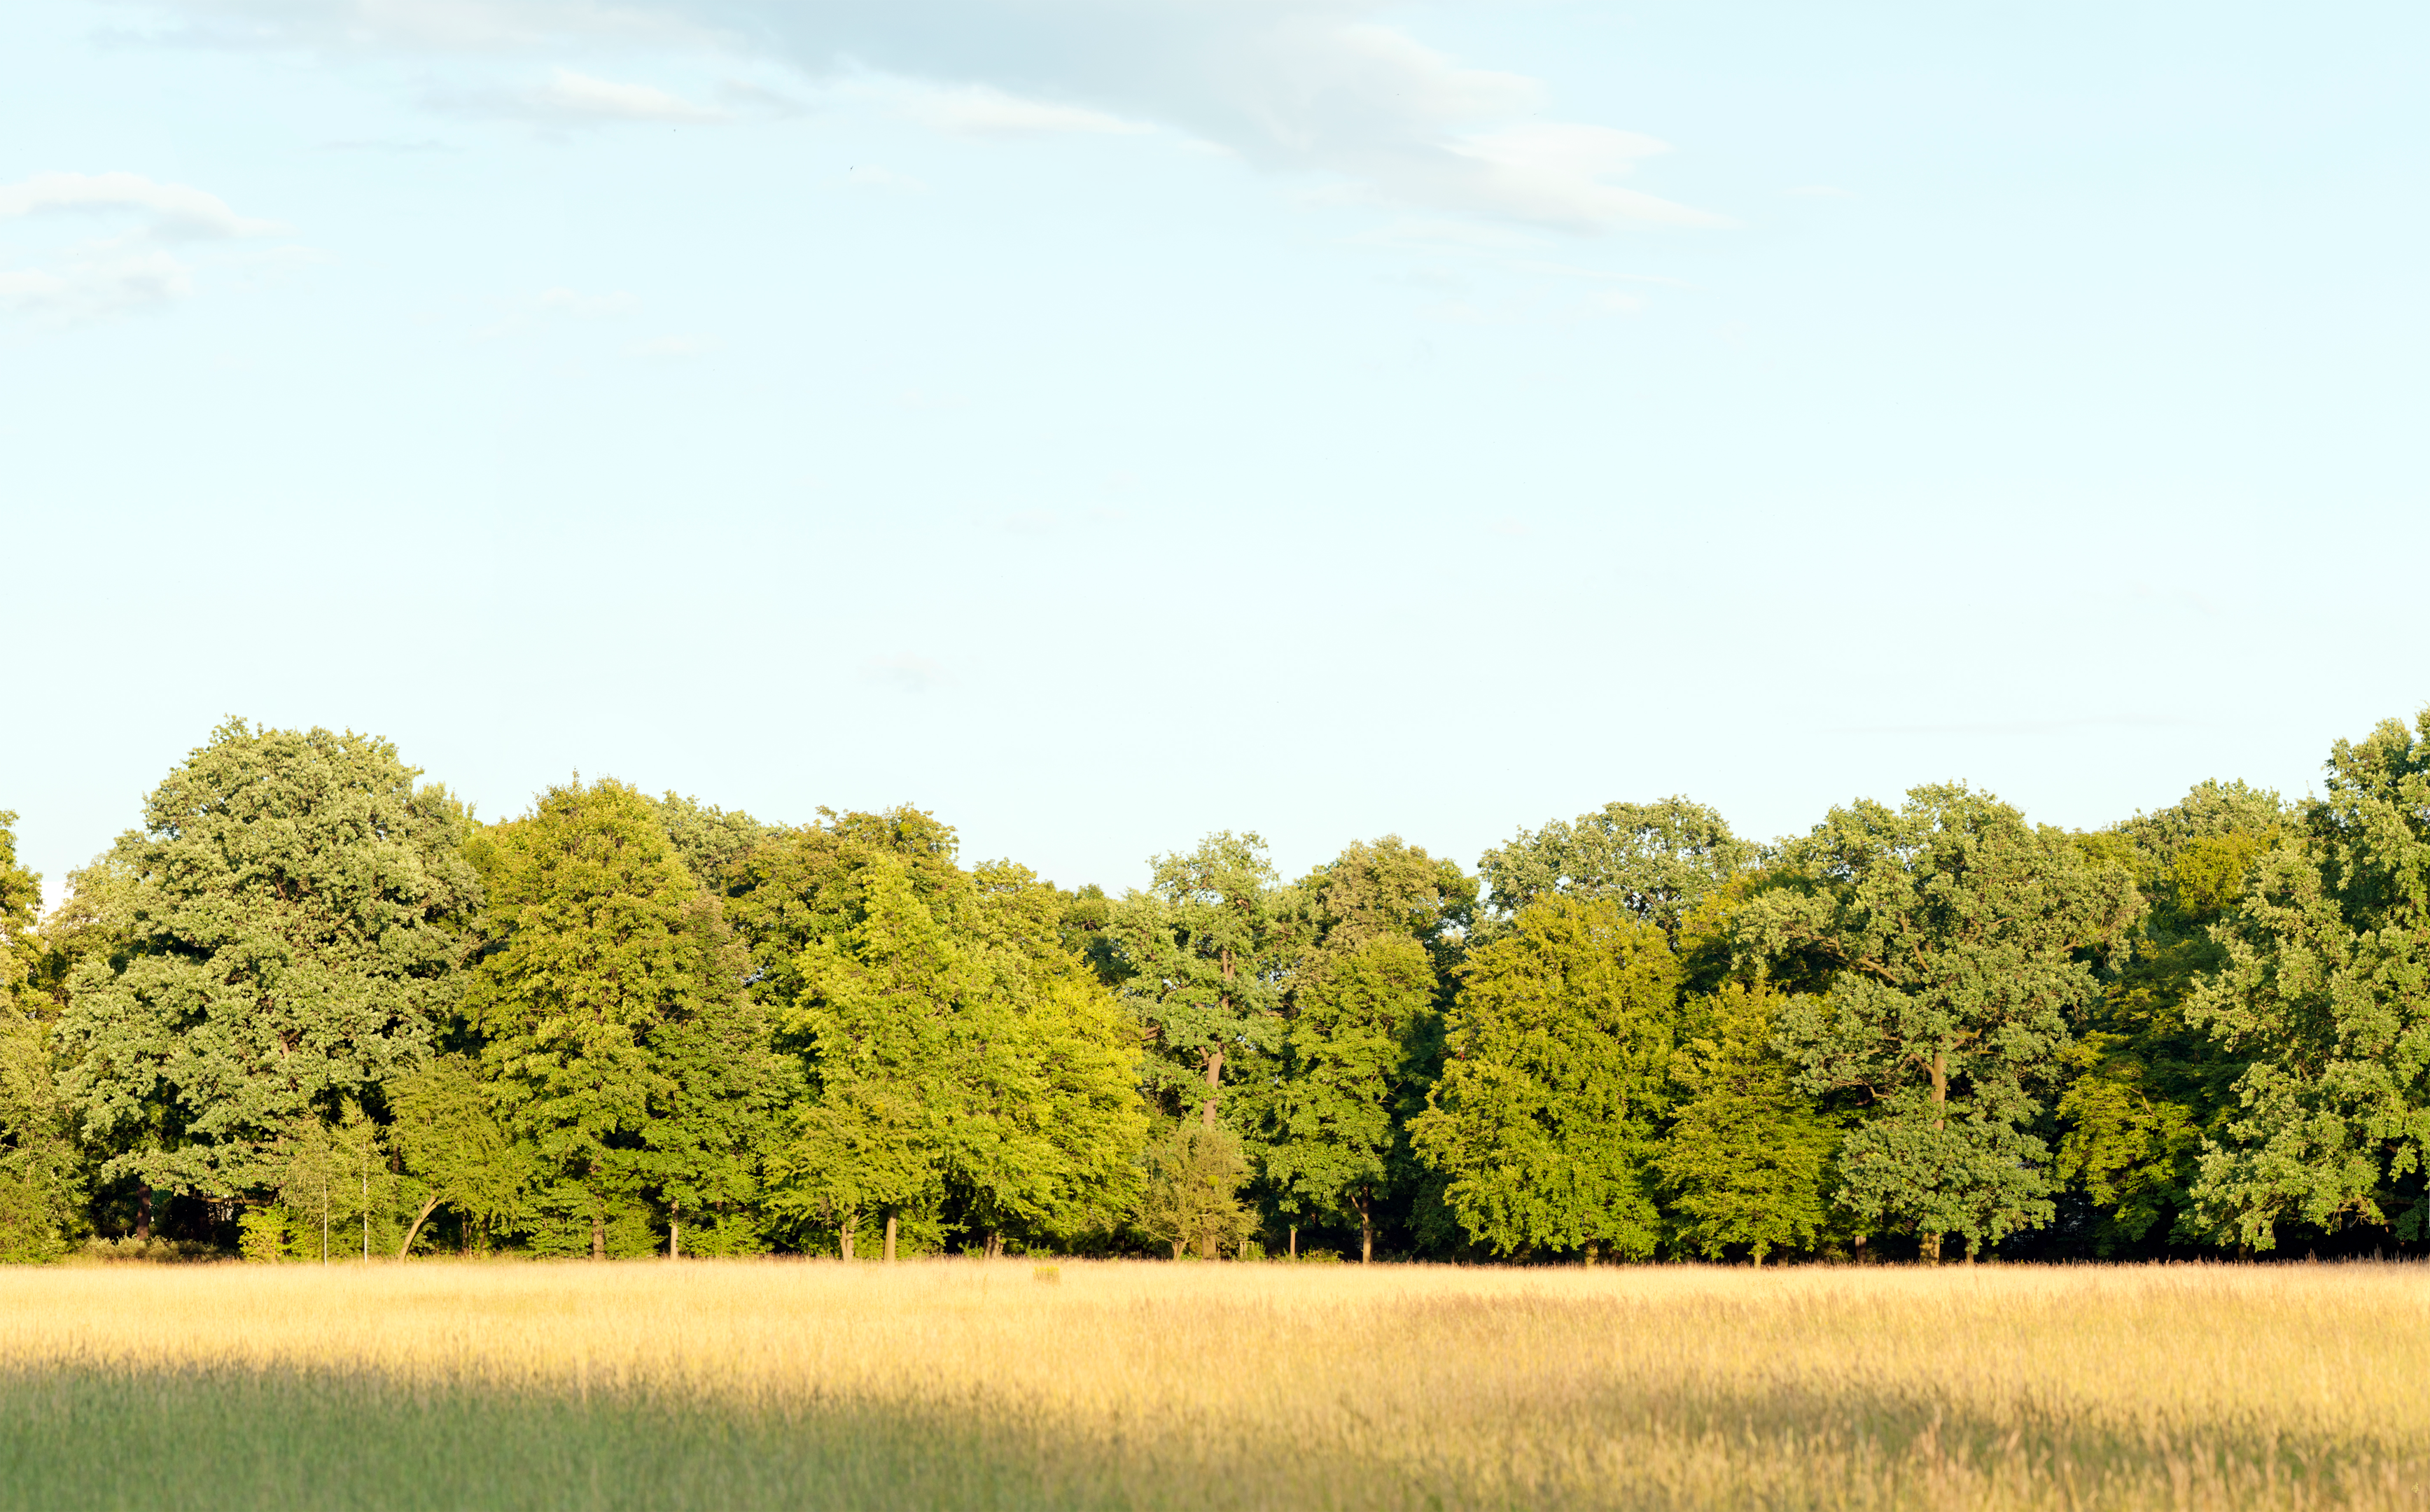 The edge of a forest along a meadow in the summer